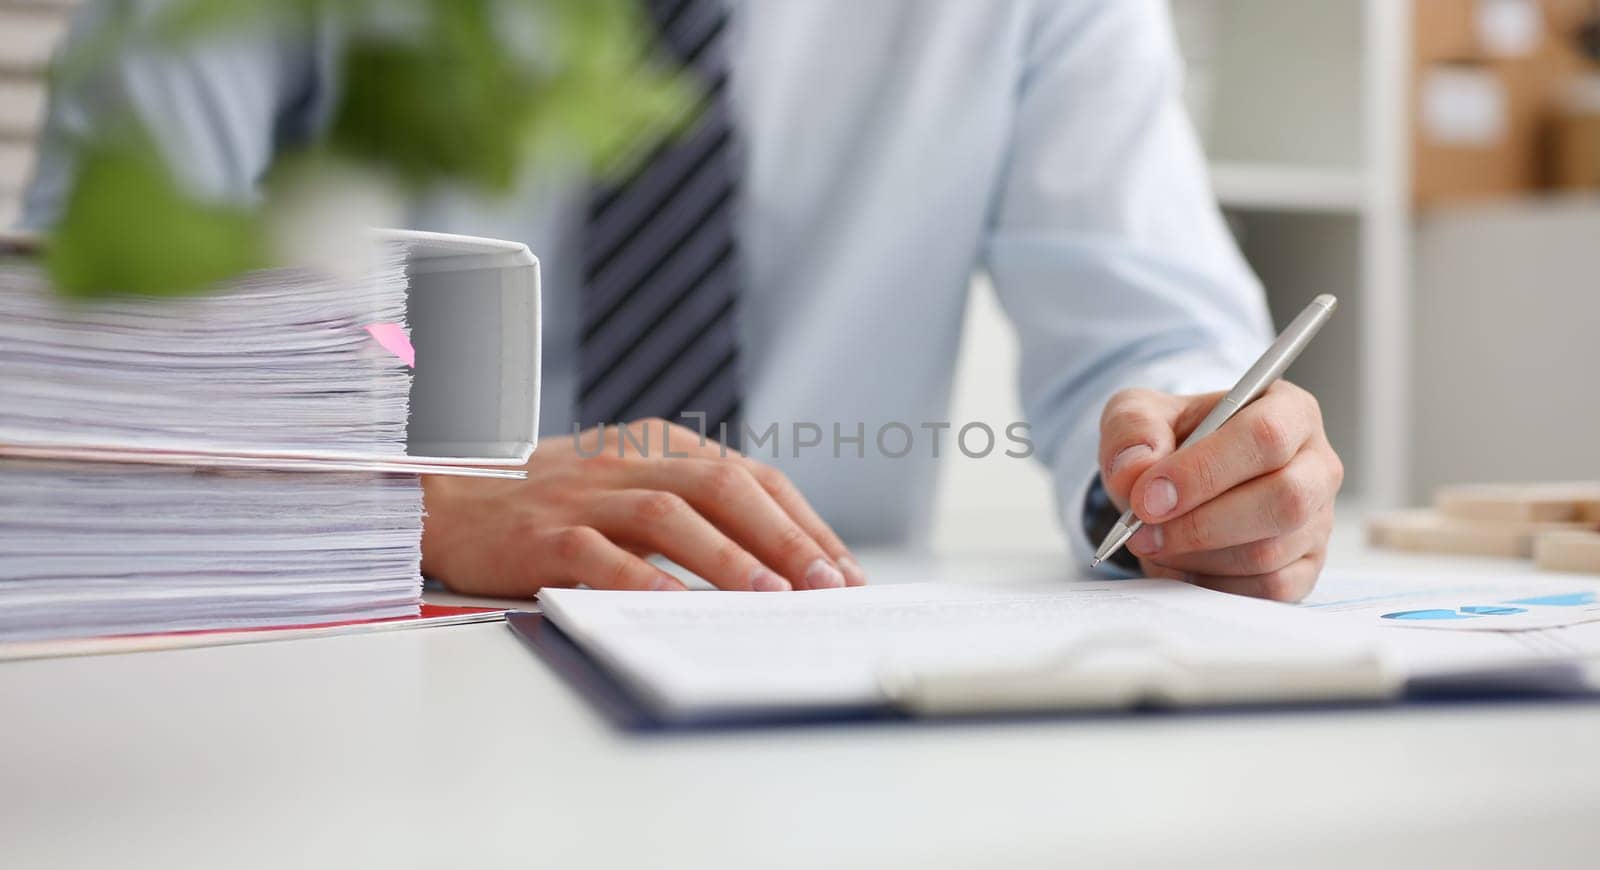 Male hand holding silver pen ready to make note in opened notebook sheet. Businessman in suit at workspace make thoughts records at personal organizer white collar conference signature concept